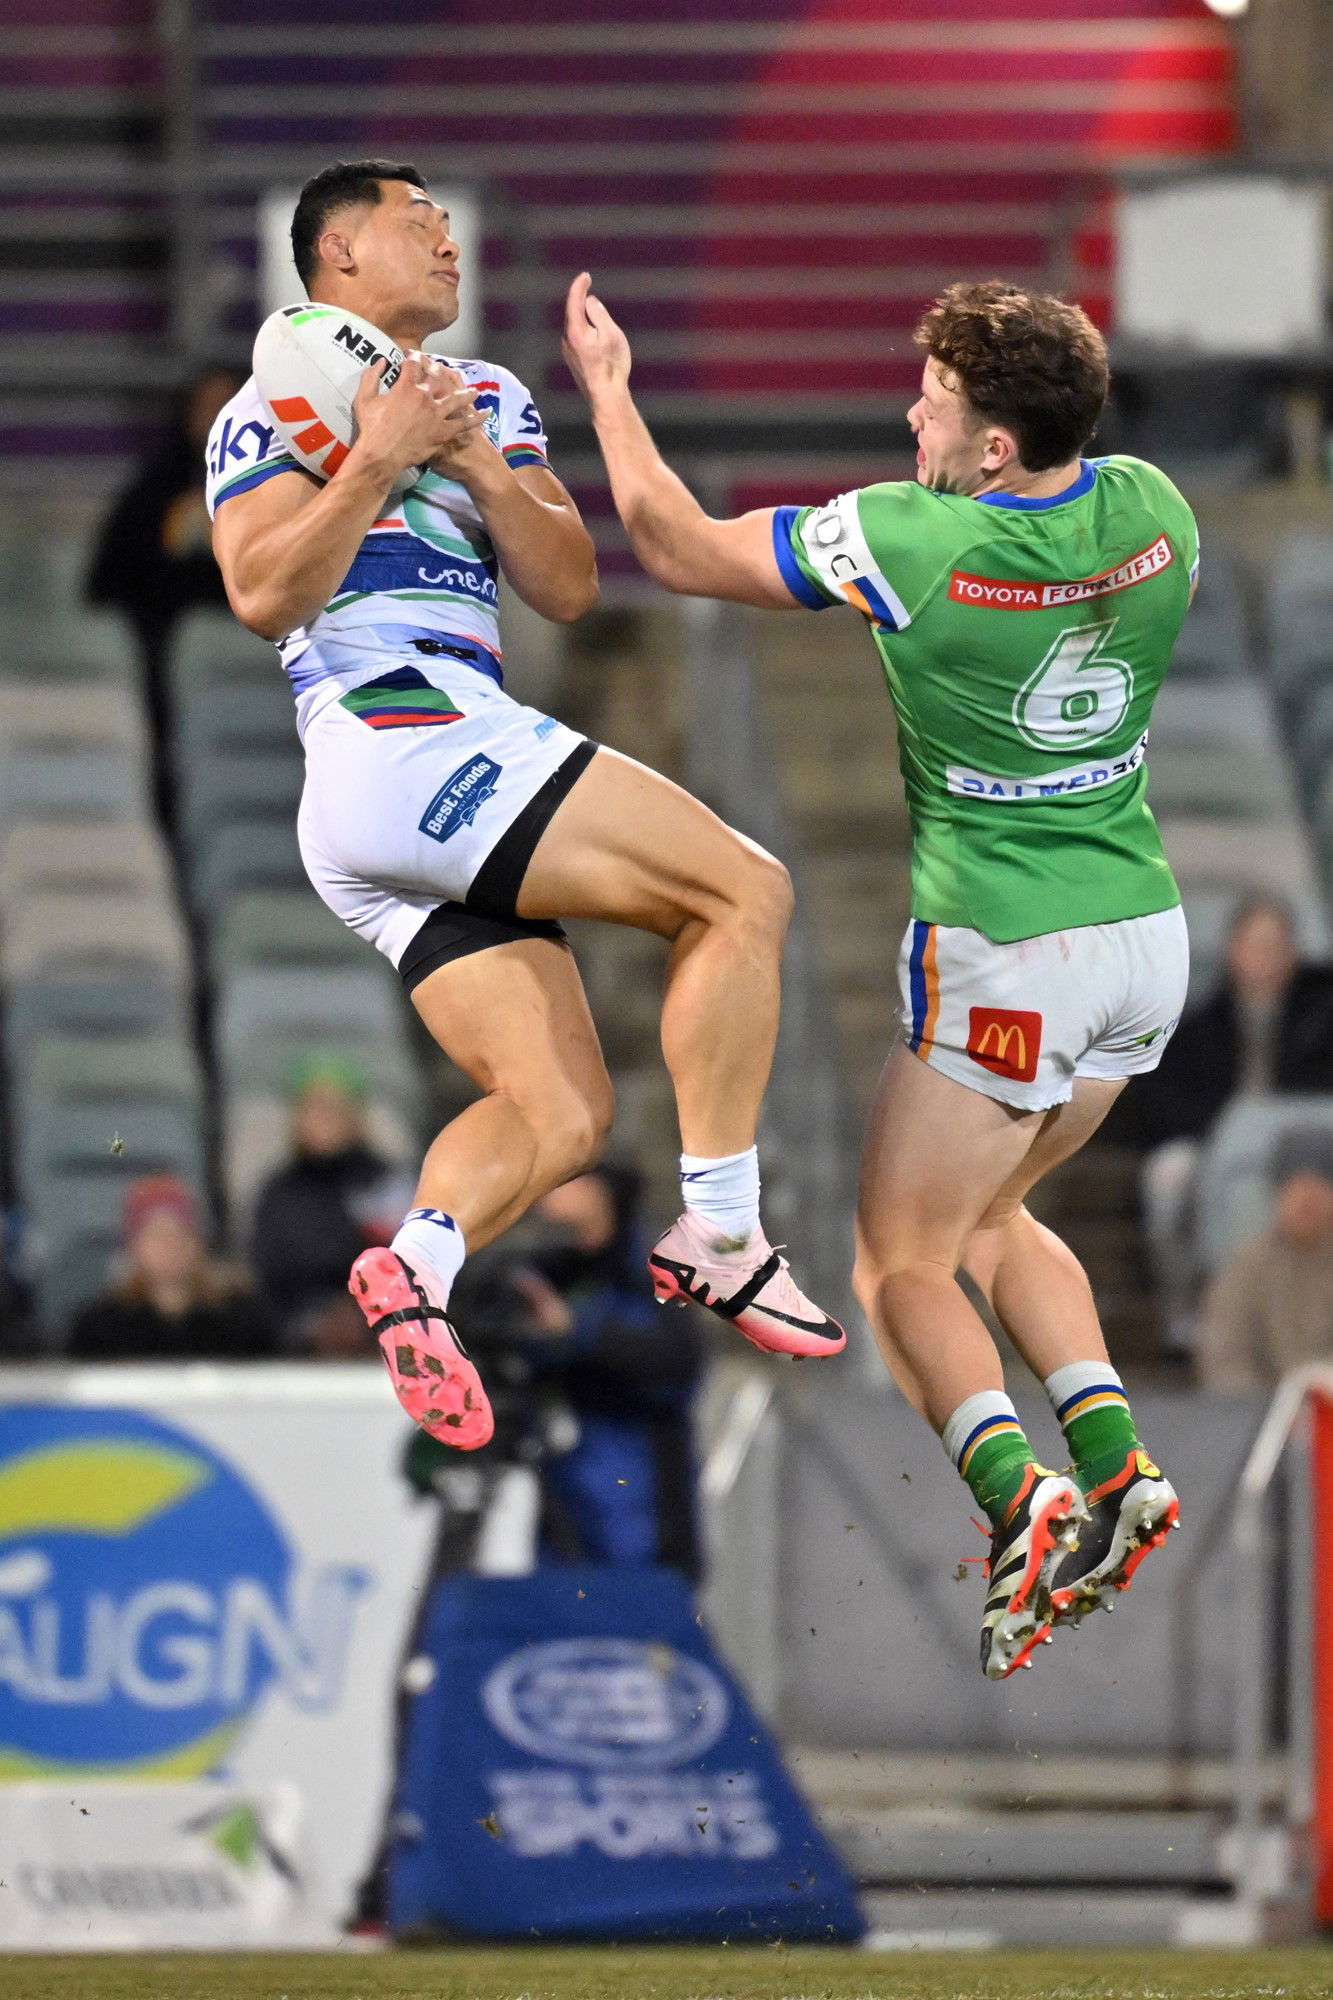 Two players jump up for the ball, as the Warriors player takes it on his chest.